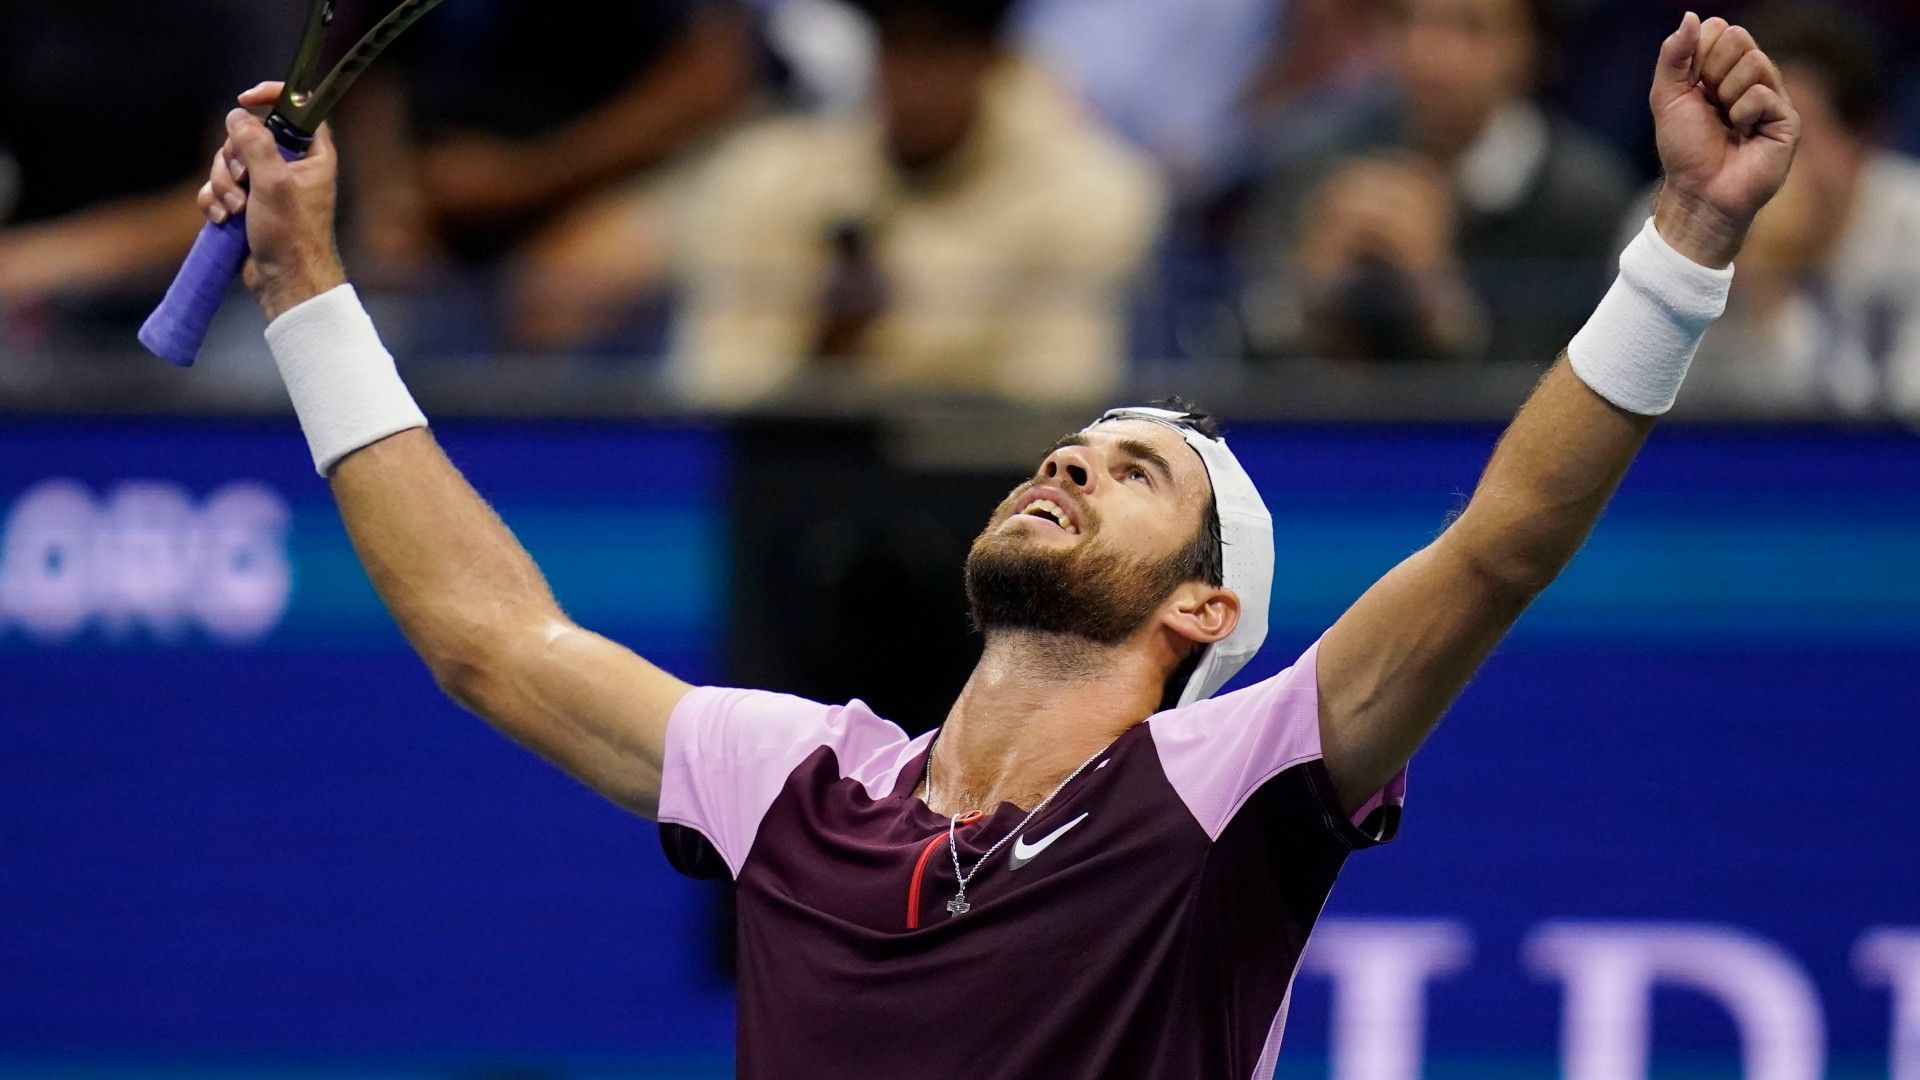 Karen Khachanov says he was 'prepared' to be the villain in fans' eyes after win over Nick Kyrgios